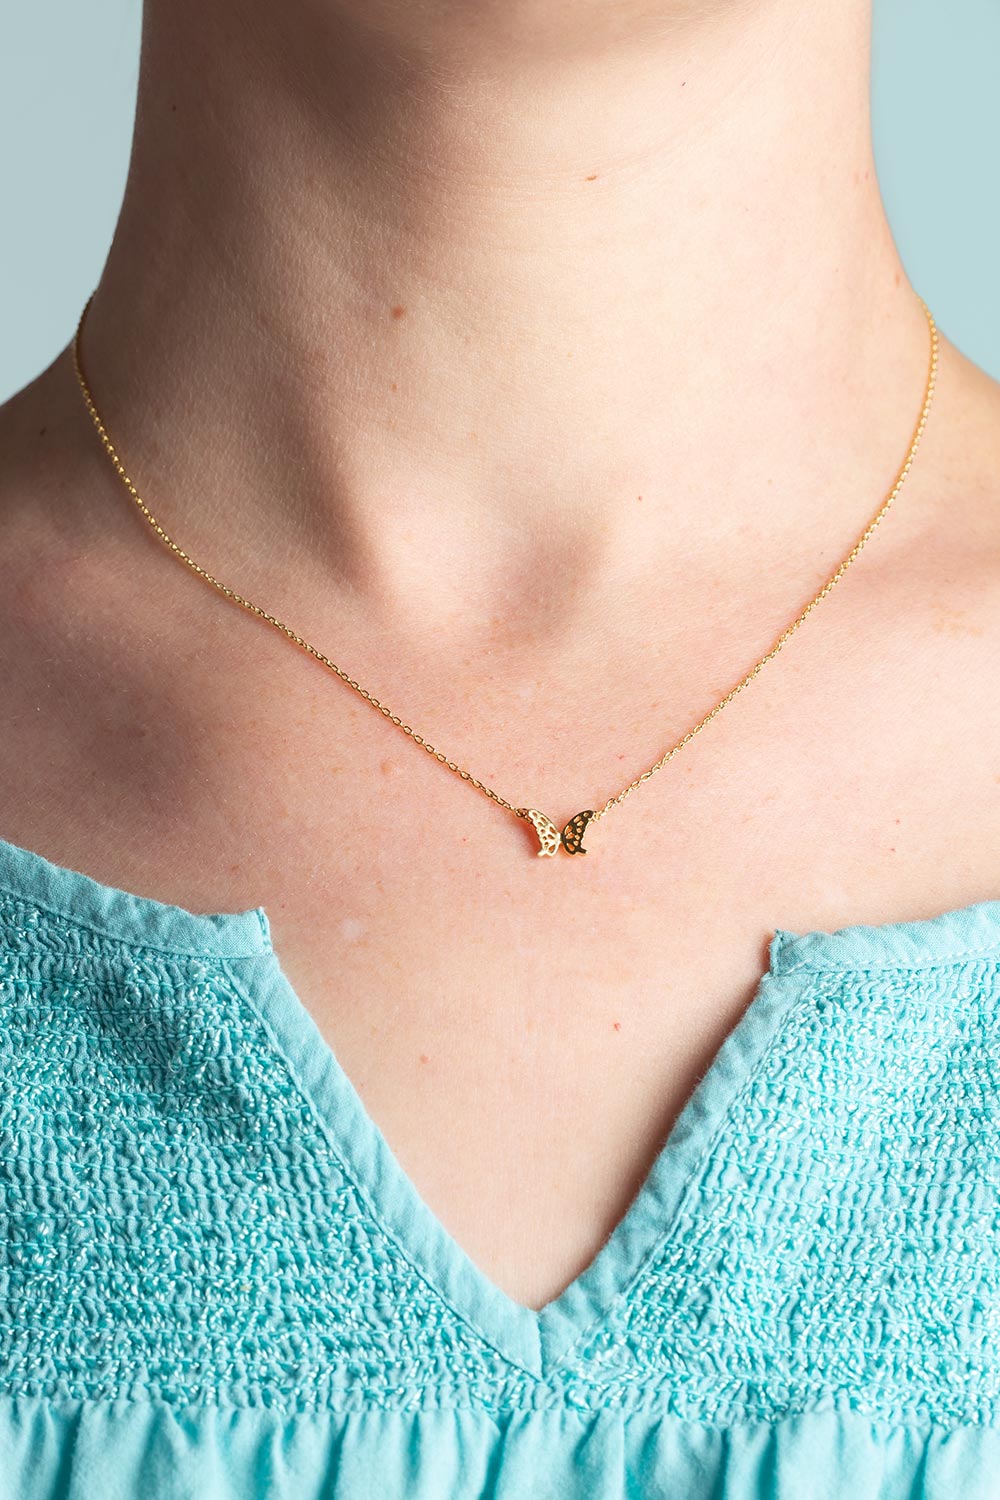 Type 1 Fleeting Moment Necklace